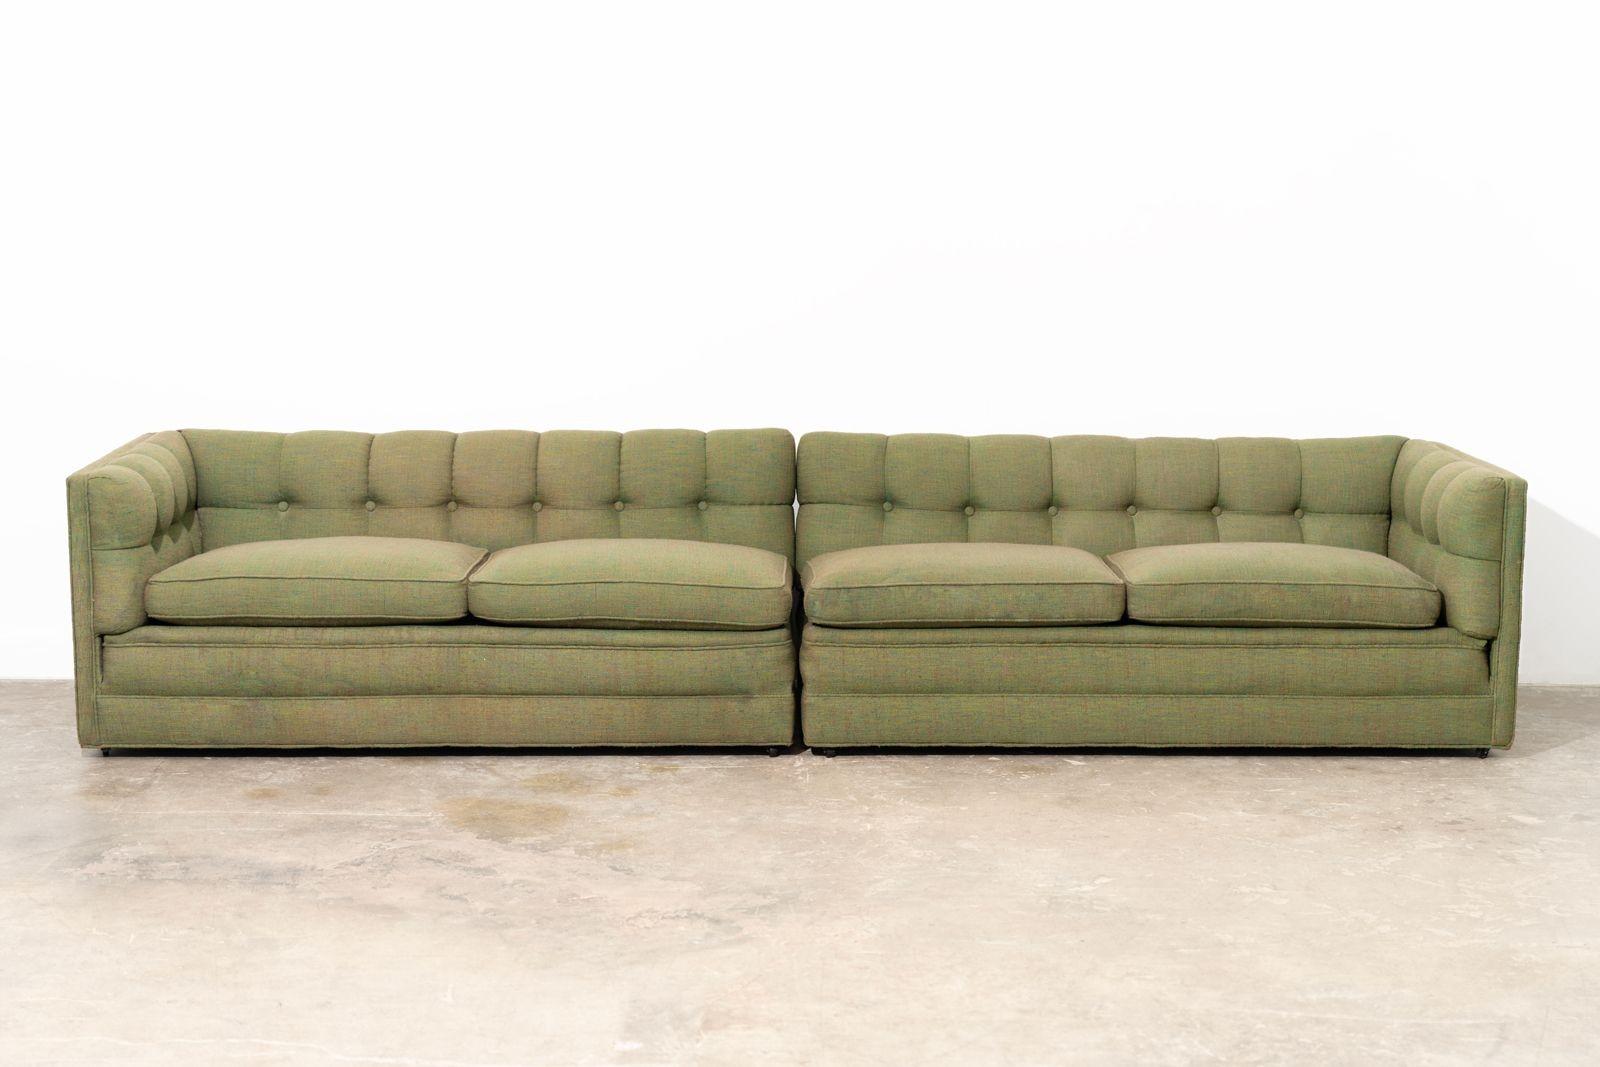 This two-piece Harvey Probber Nuclear Sert sectional sofa is one of his earliest designs and was fabricated in the early 1950s. 
 
This is a beautiful two-piece sectional sofa designed by Harvey Probber in the 1960s. This design was part of his